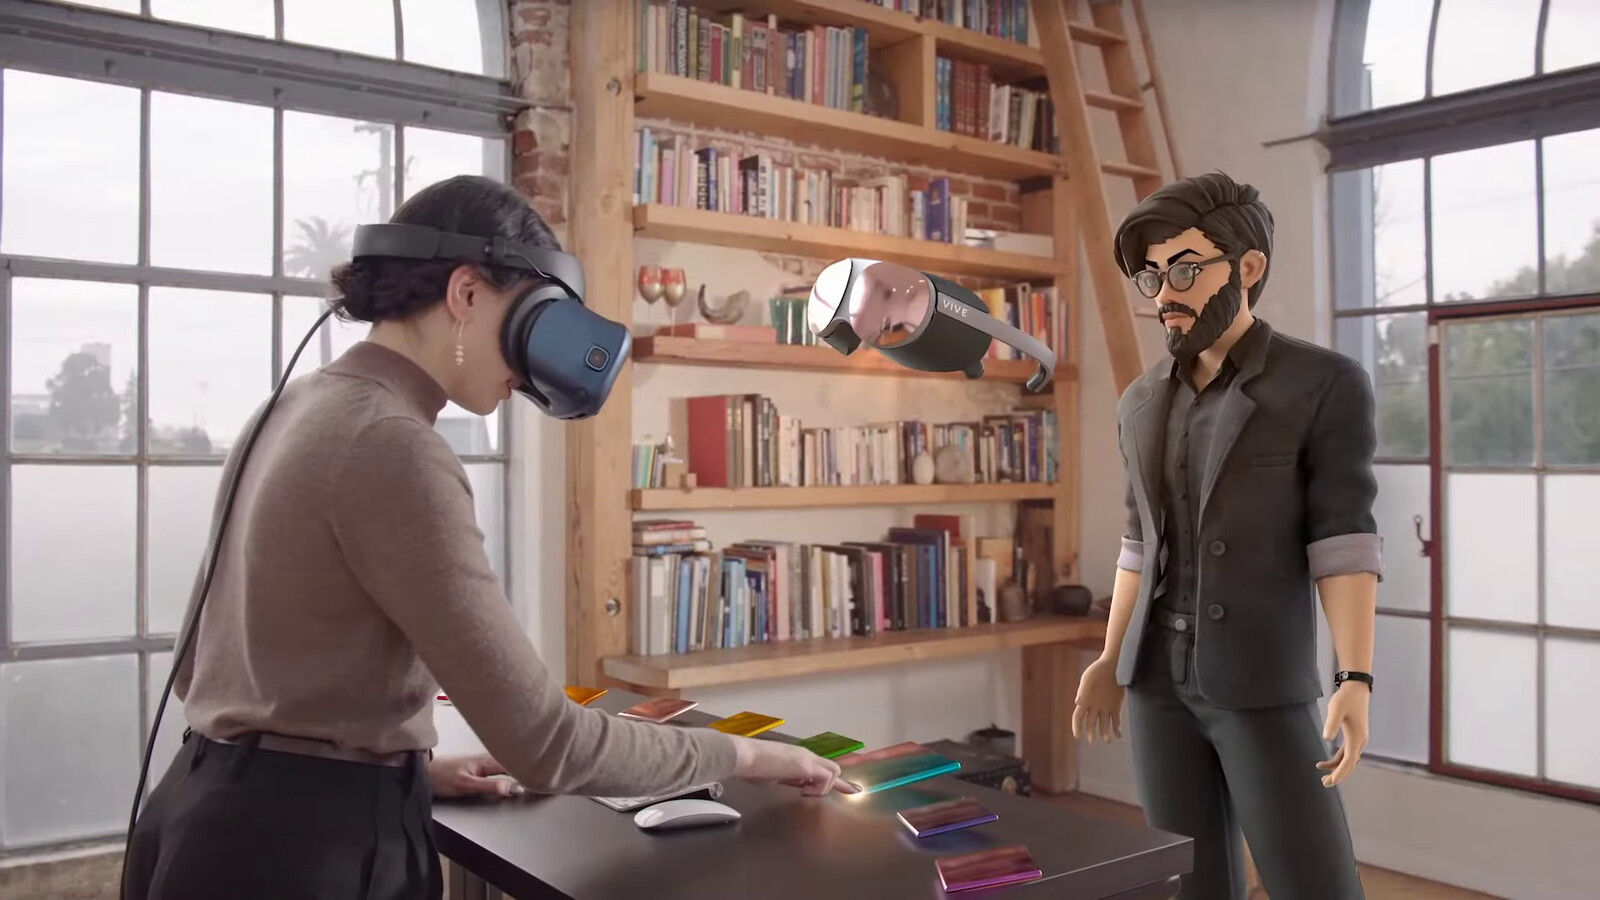 A new sneak peek at some of the concept work our team at HTC Vive Creative Labs has been developing. Remote work with Virtual Avatars!